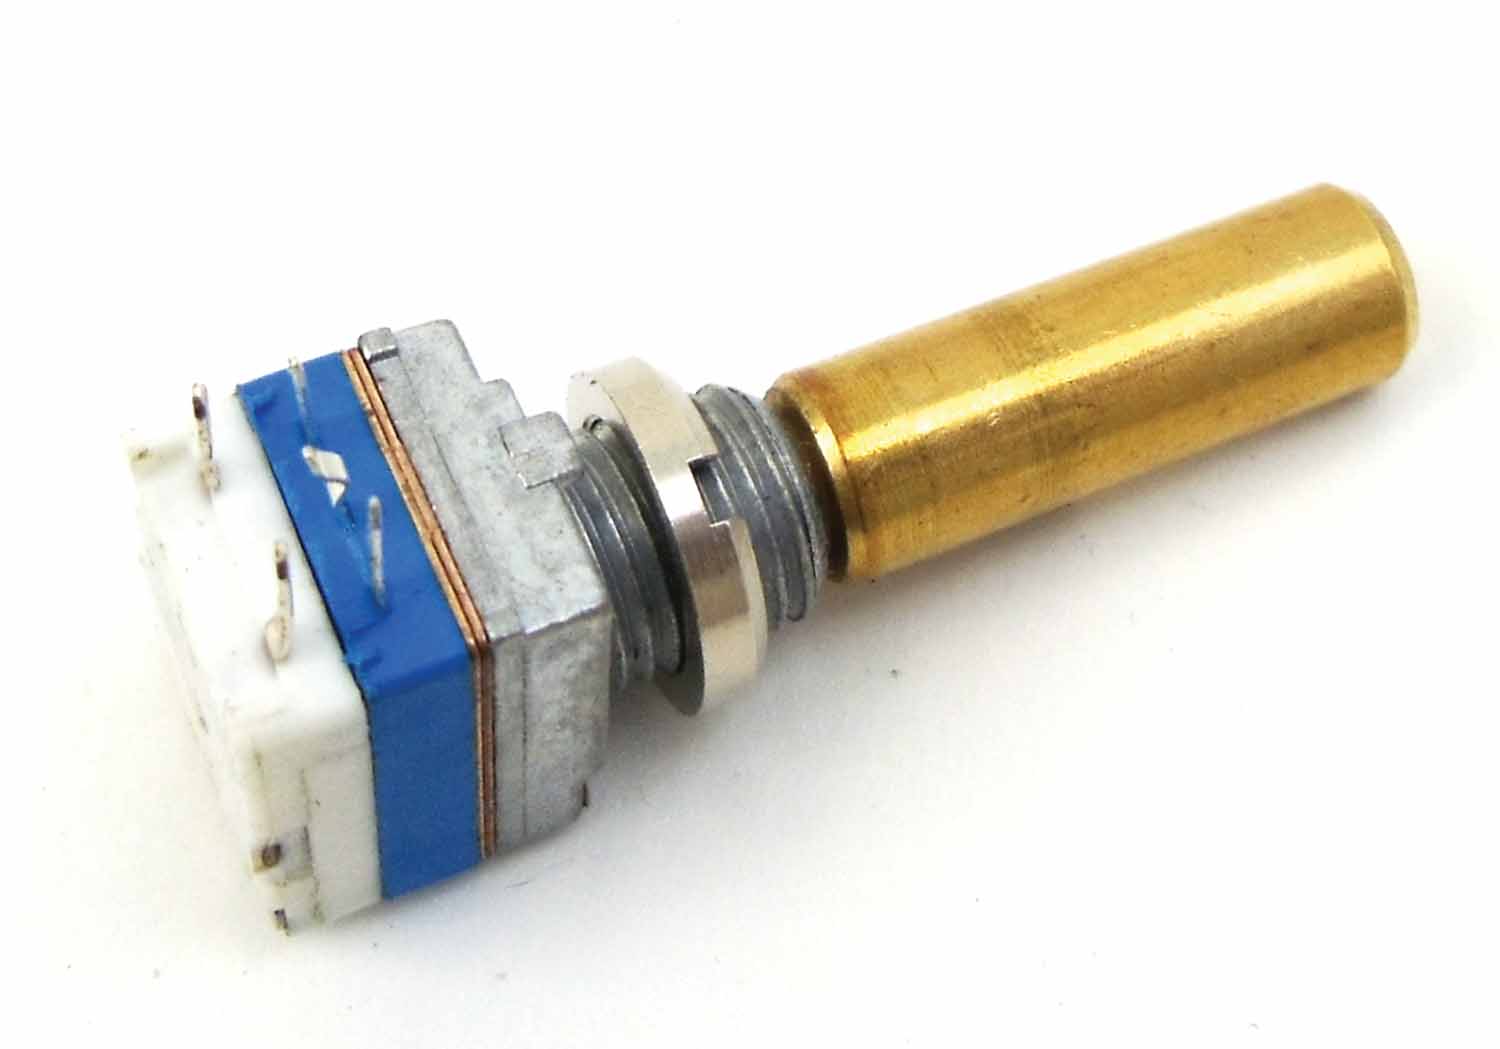 Channel Selector Potentiometer For Bc880 & Bc980 Scanners